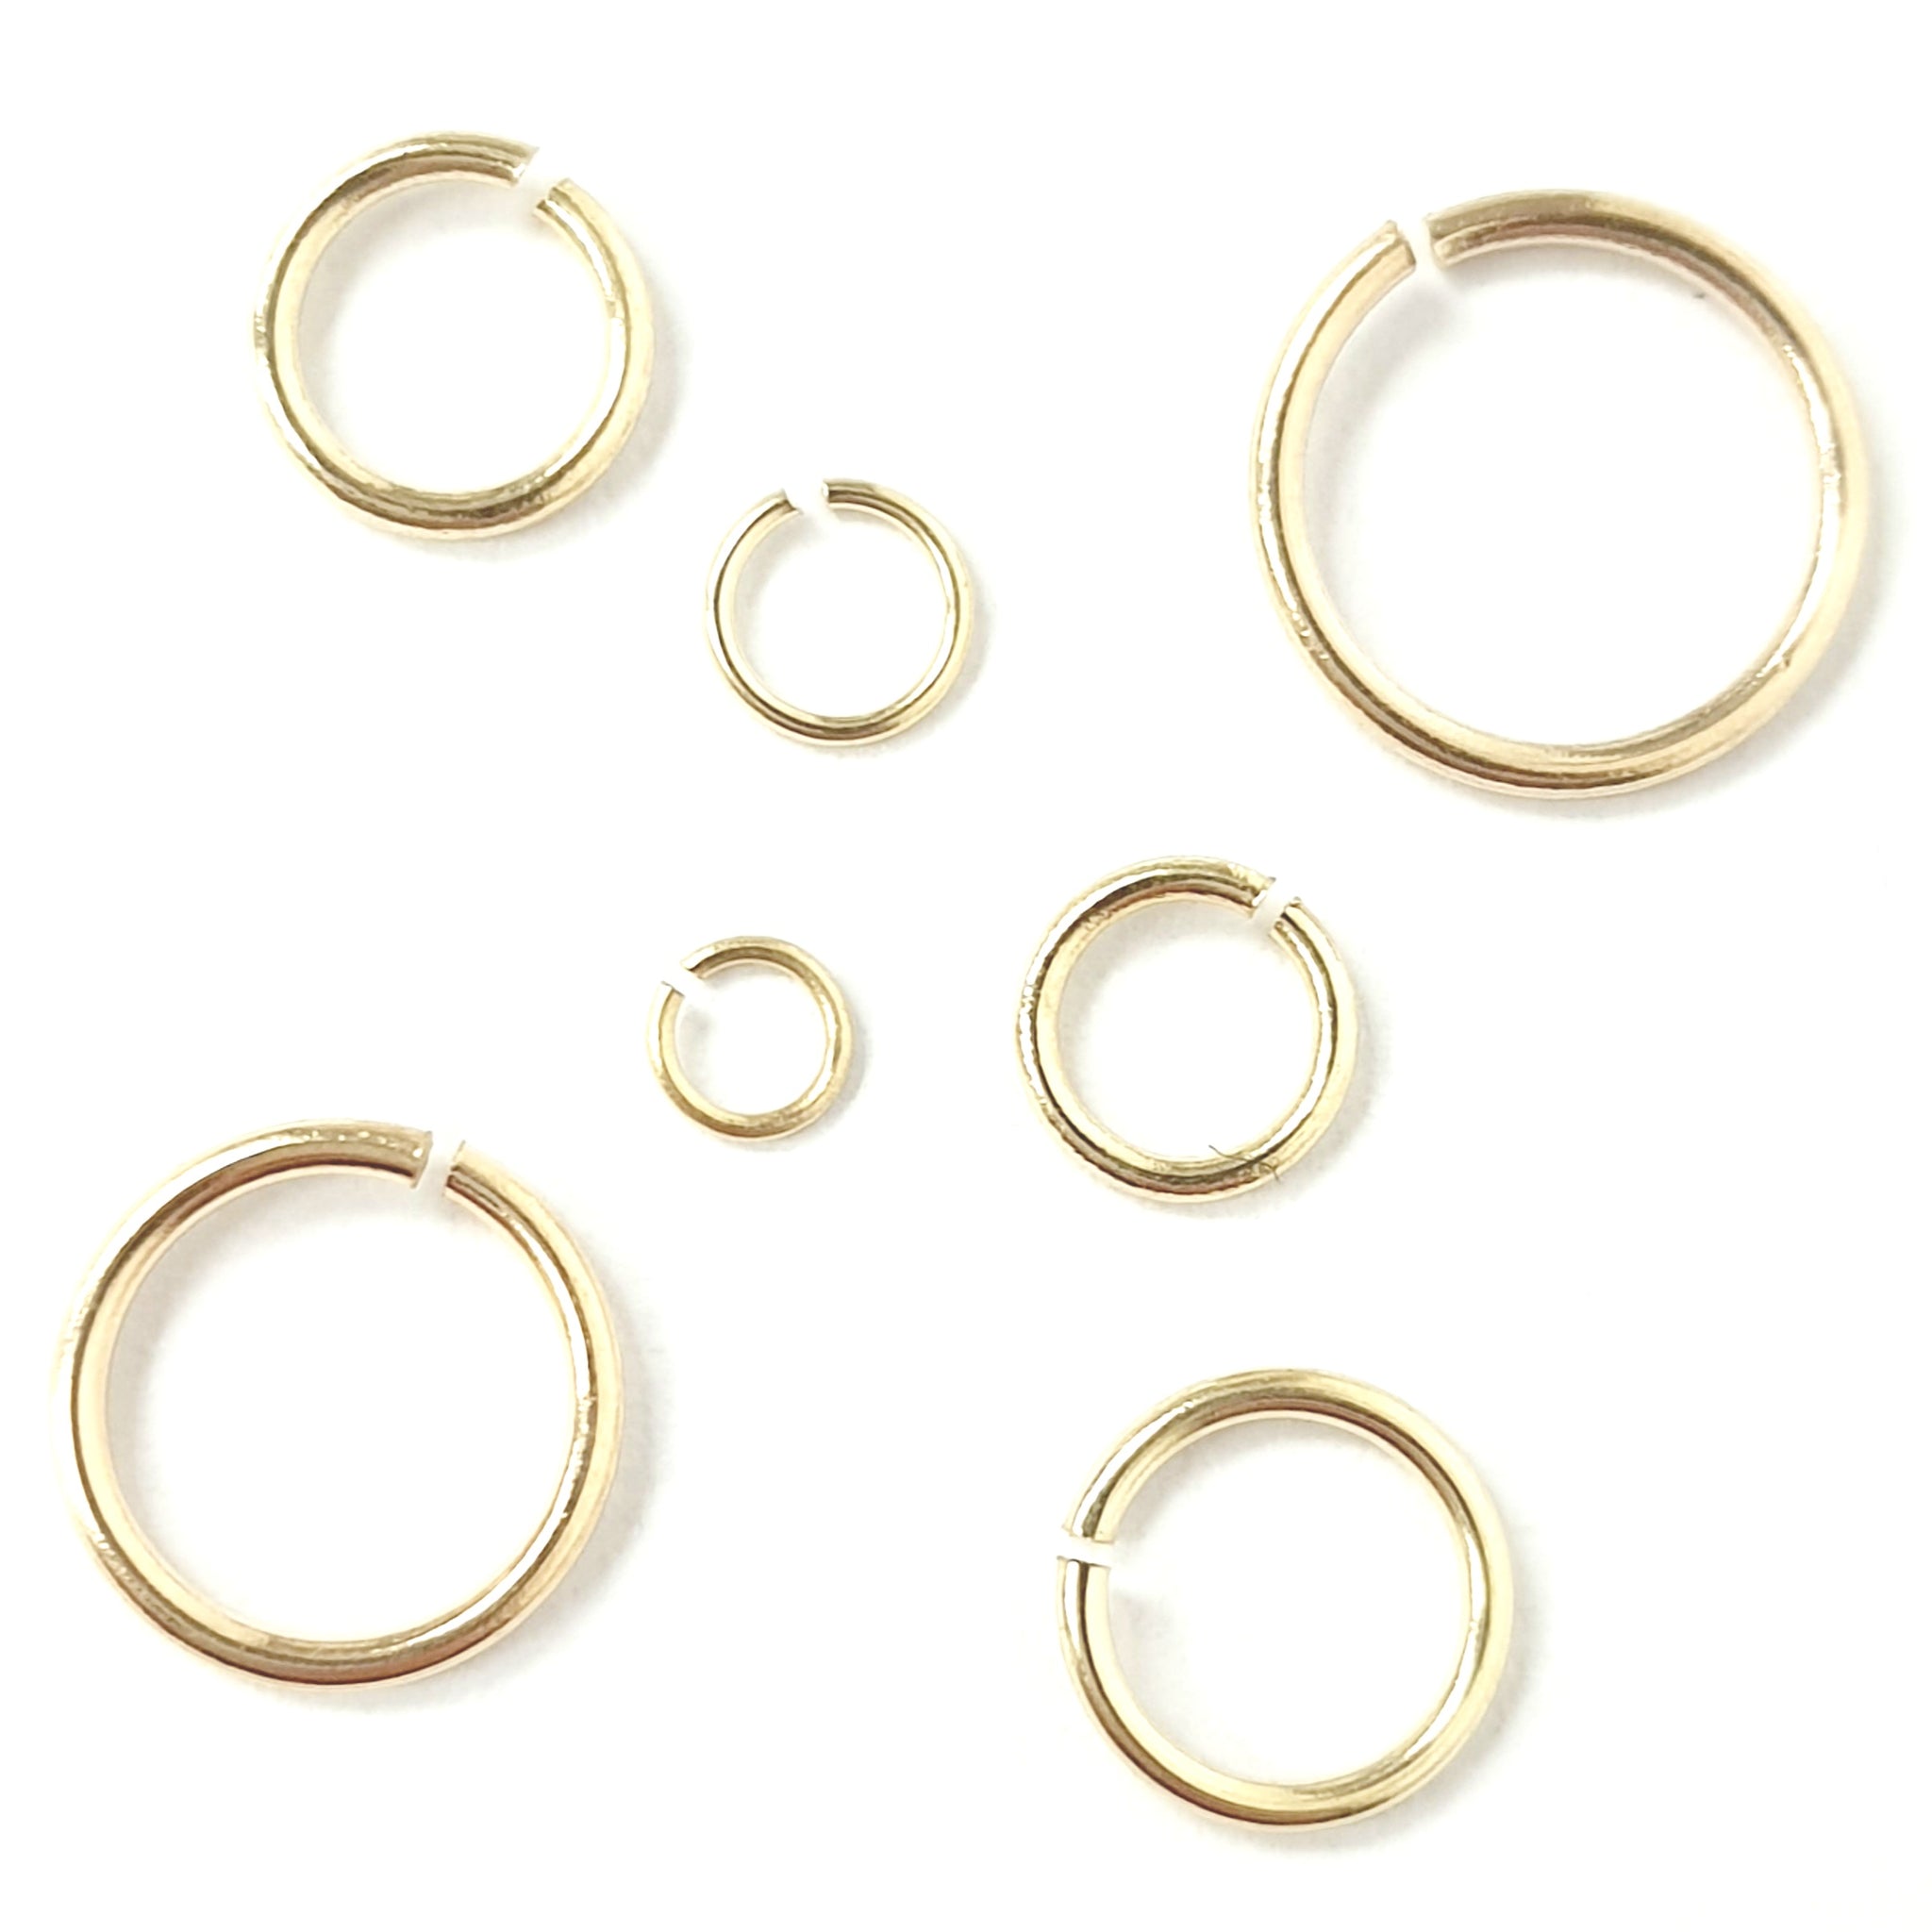 StampingBlanks.com - 12mm Stainless Steel Jump Rings